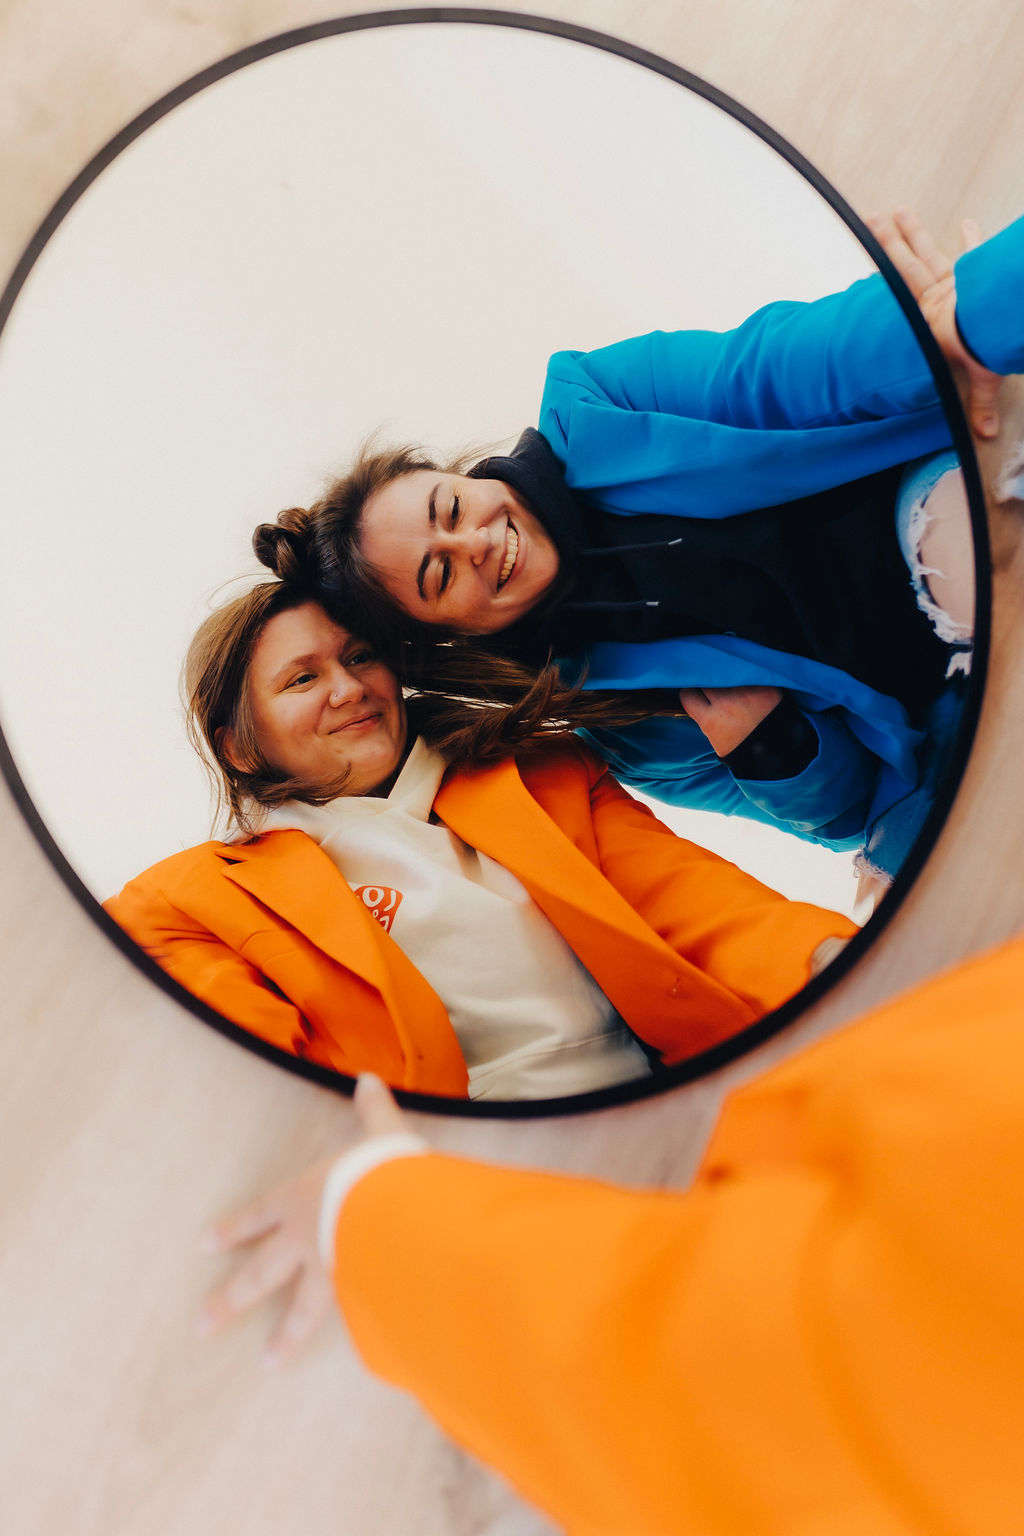 best blogging tools for beginners featured image showing the reflection of two women in bright colored blazers in a mirror